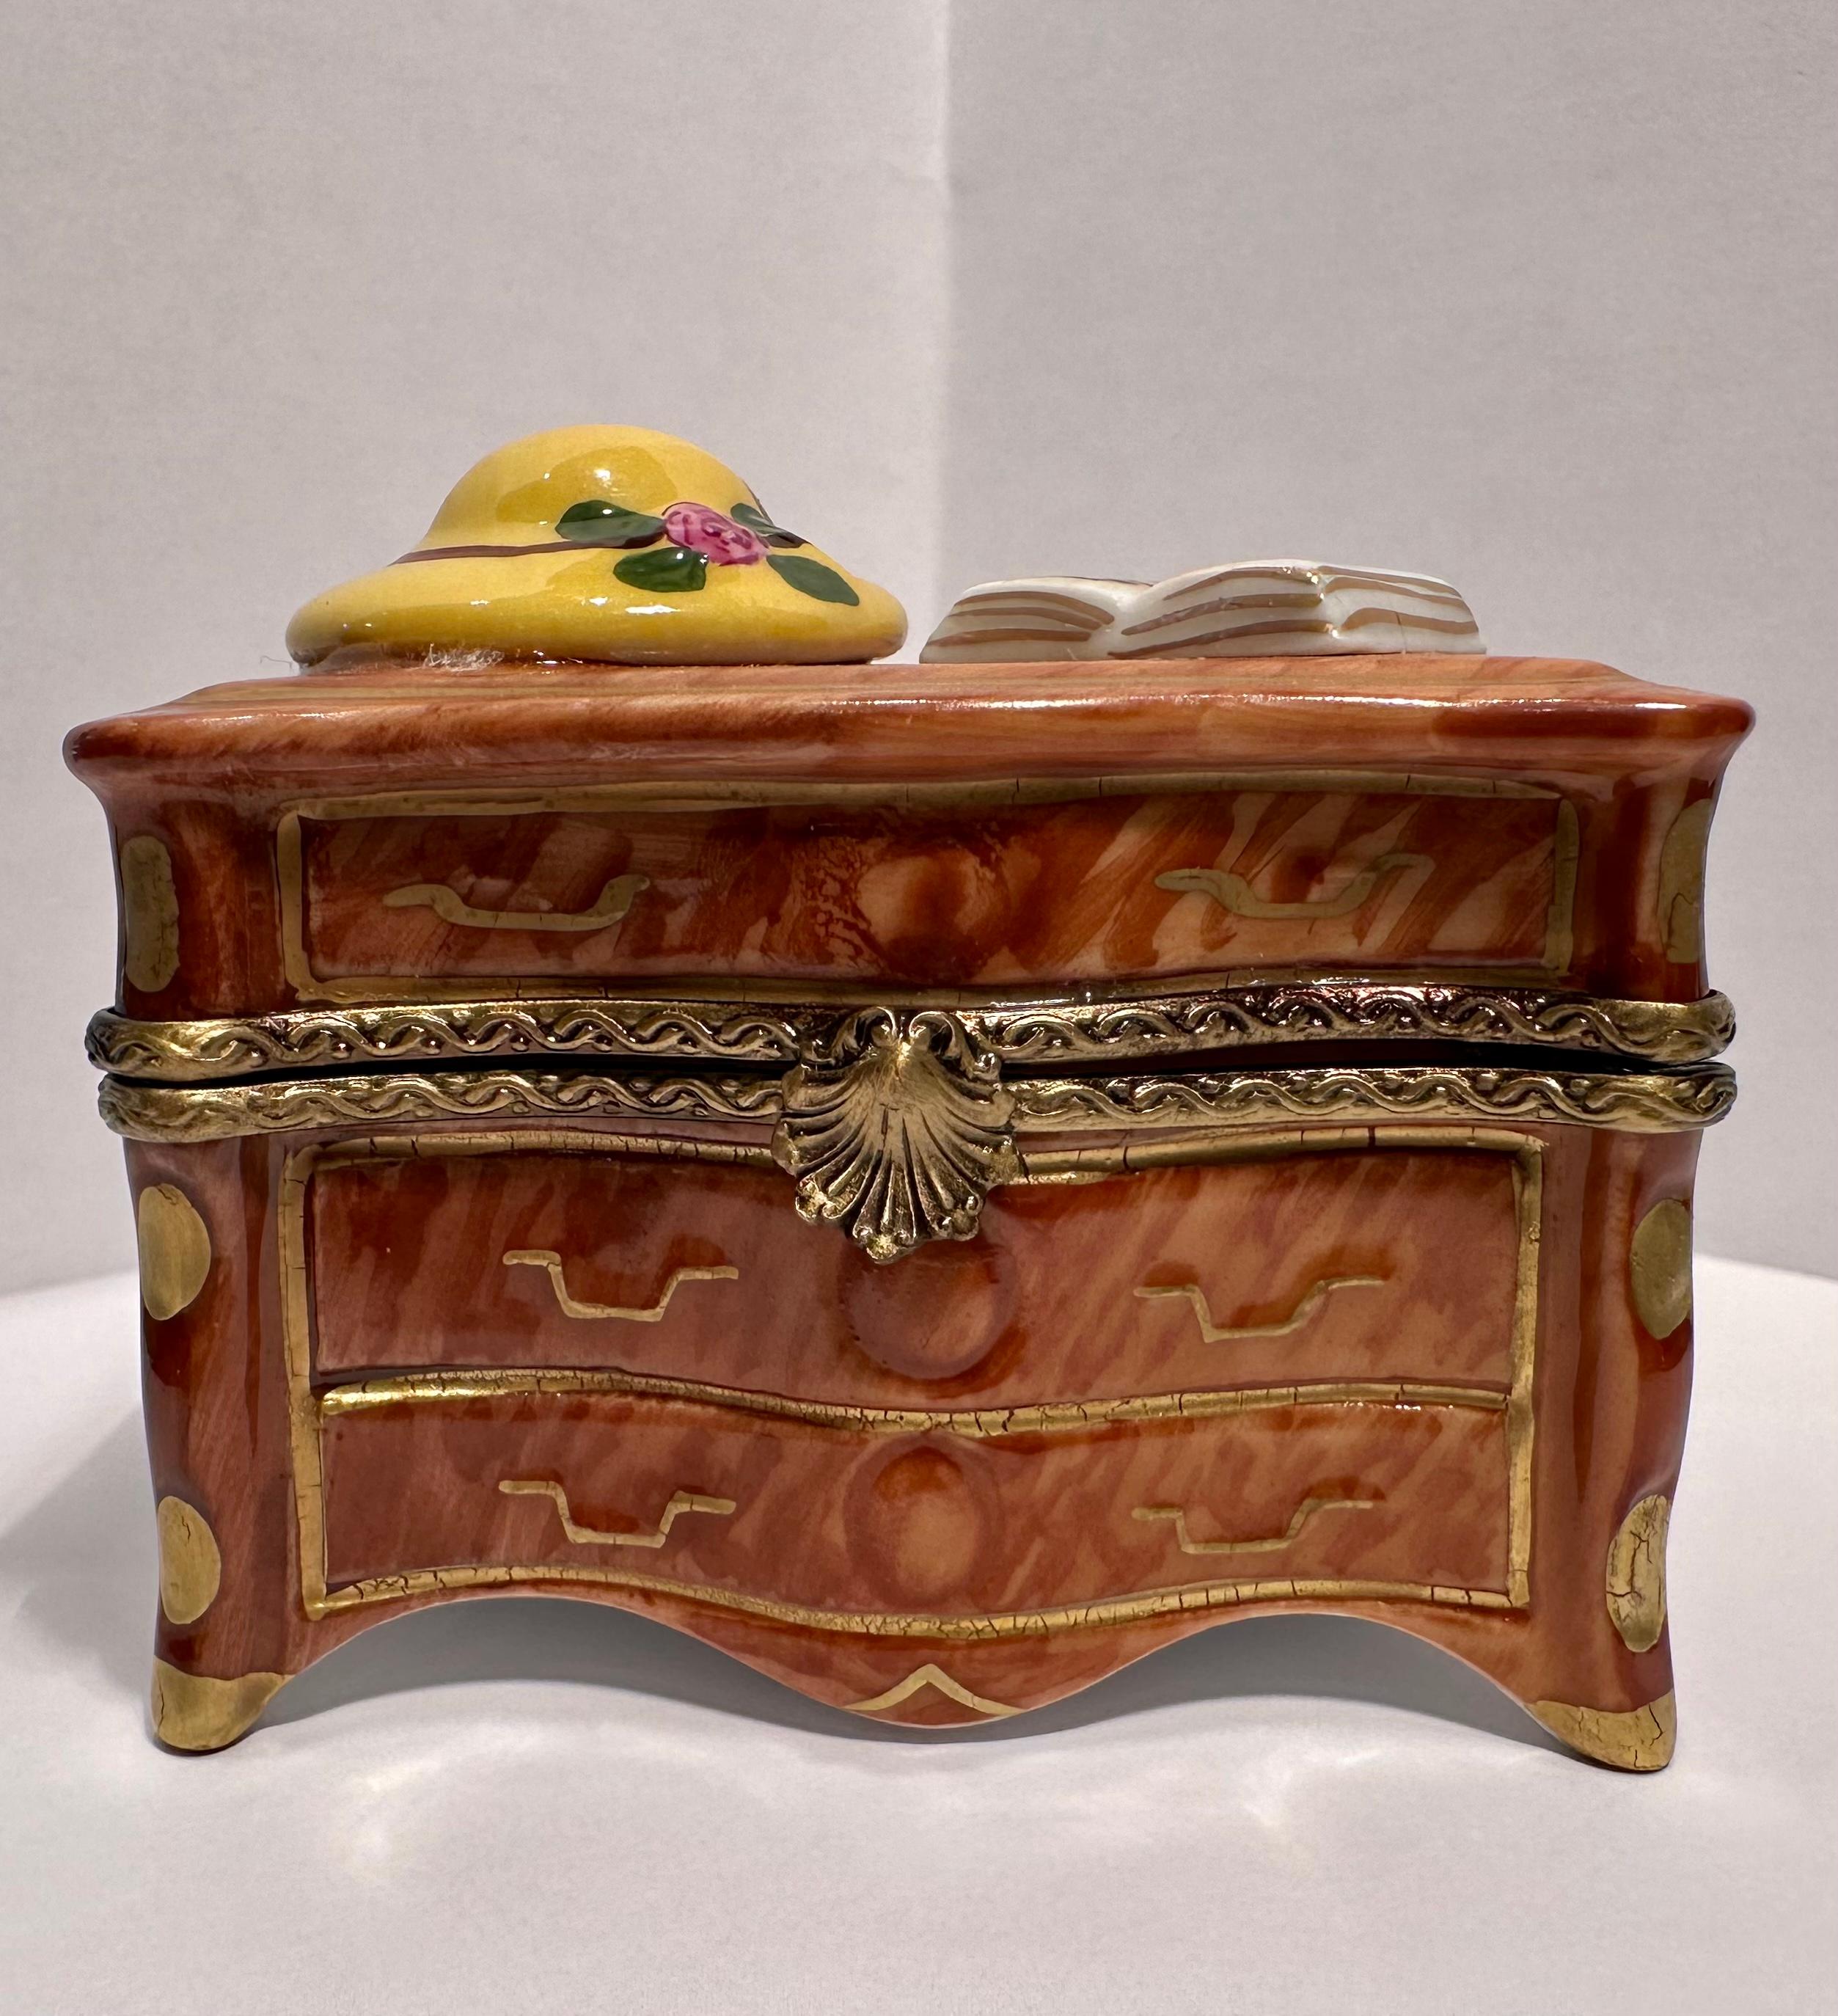 Collectible and very unique, Limoges porcelain miniature trinket box is handmade and hand painted in France and features a very detailed wood grain dresser with hand painted handles and paneled sides on cabriole legs.  The fancy antique gold gilt